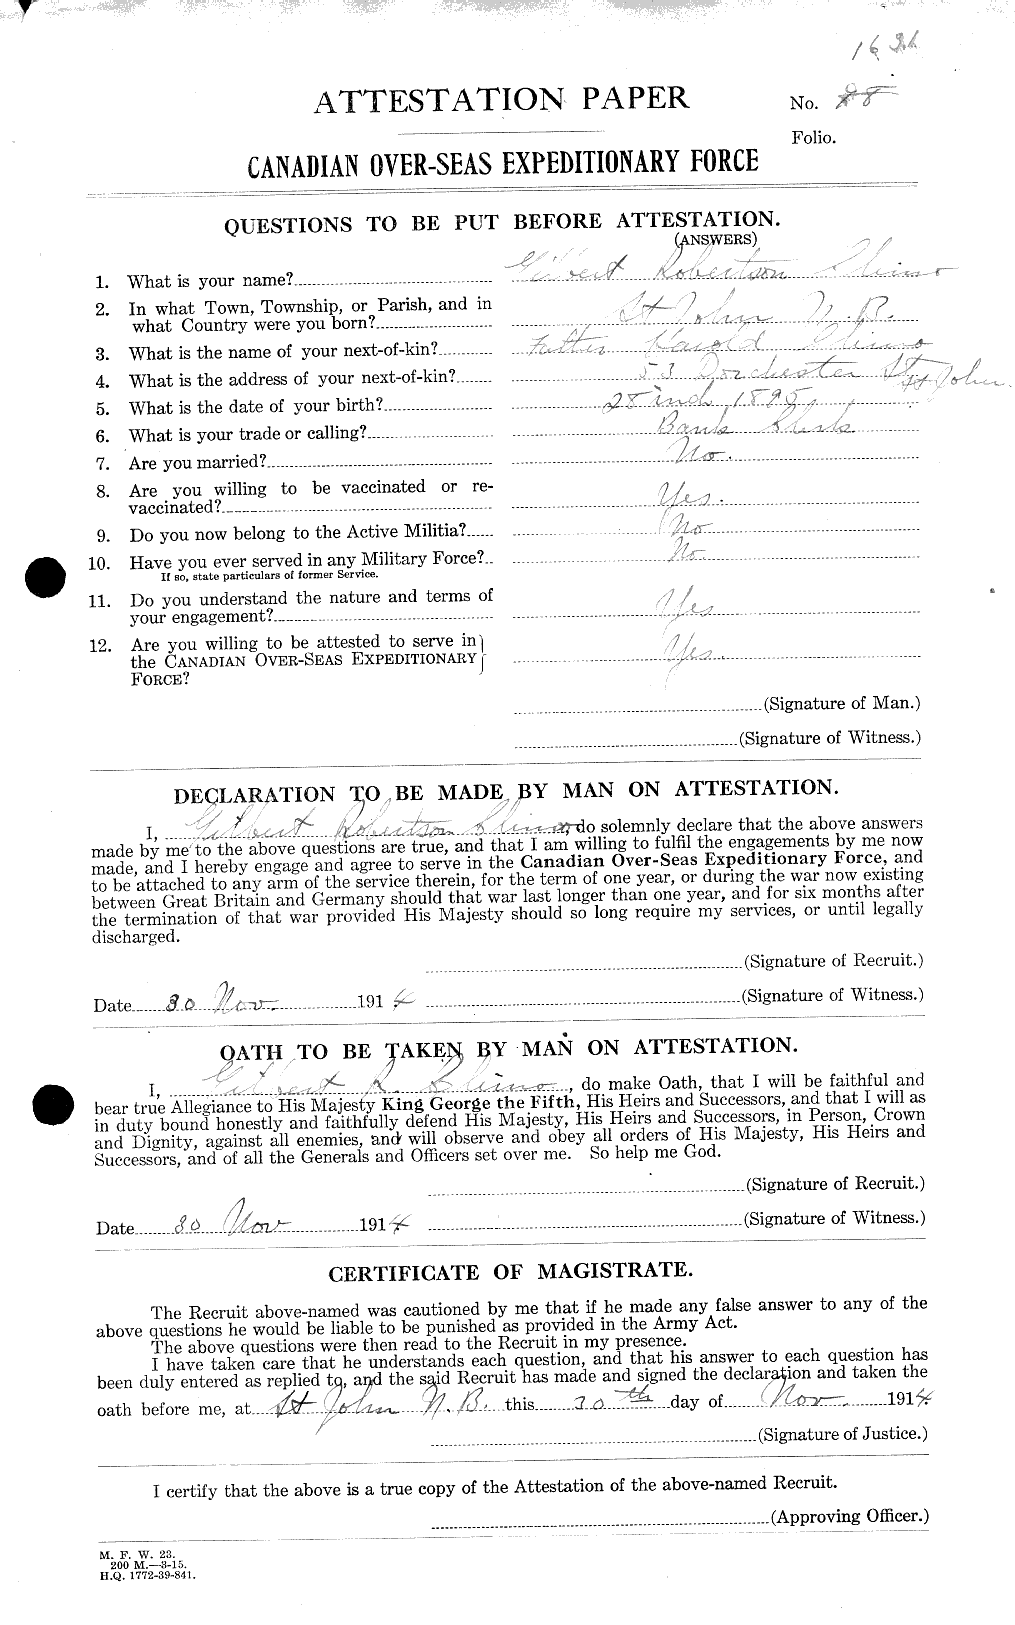 Personnel Records of the First World War - CEF 025884a